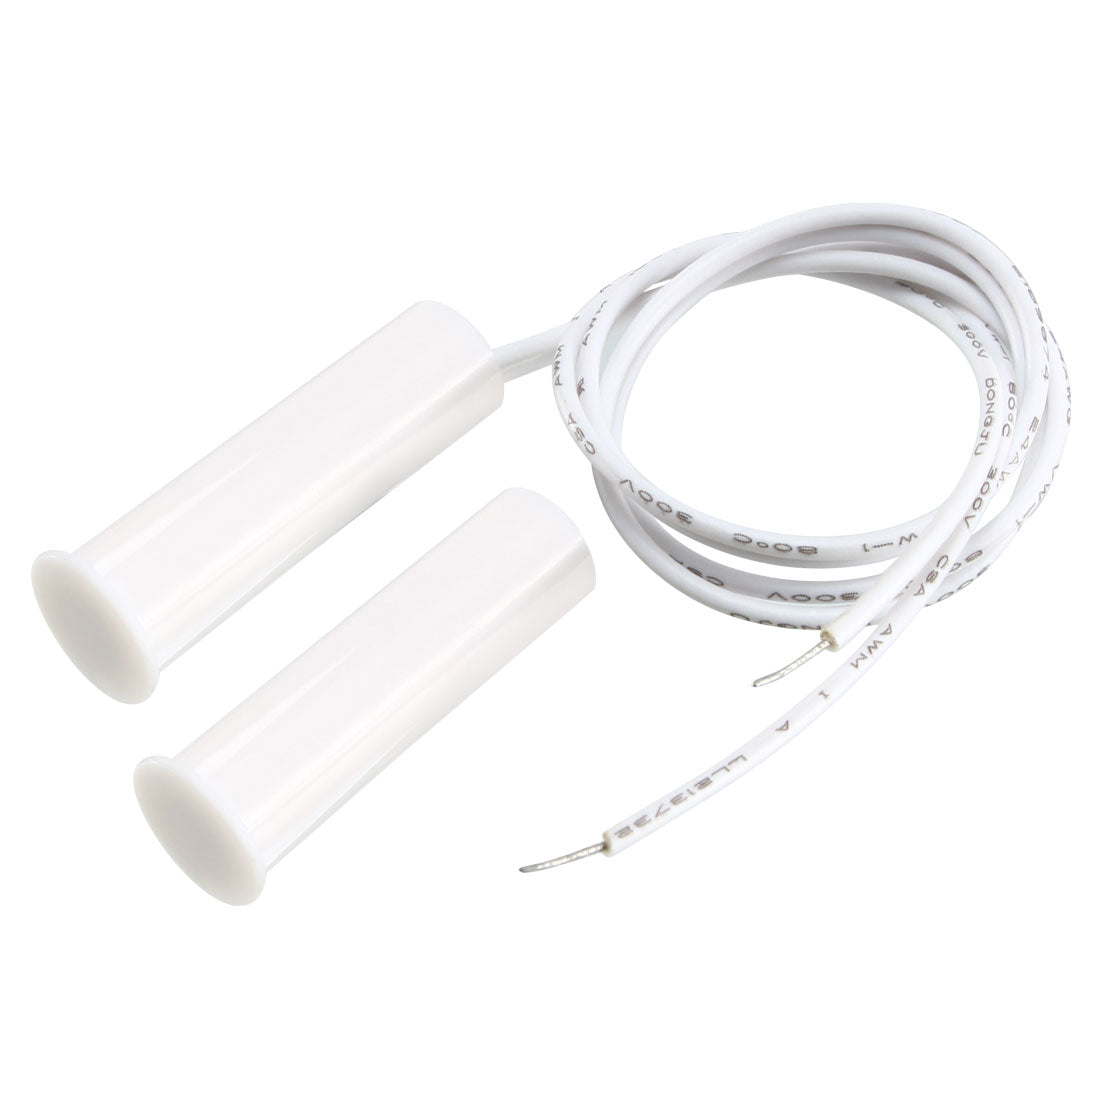 uxcell Uxcell RC-35 NO Recessed Wired Security Window Gate Contact Sensor Alarm Magnetic Reed Switch White